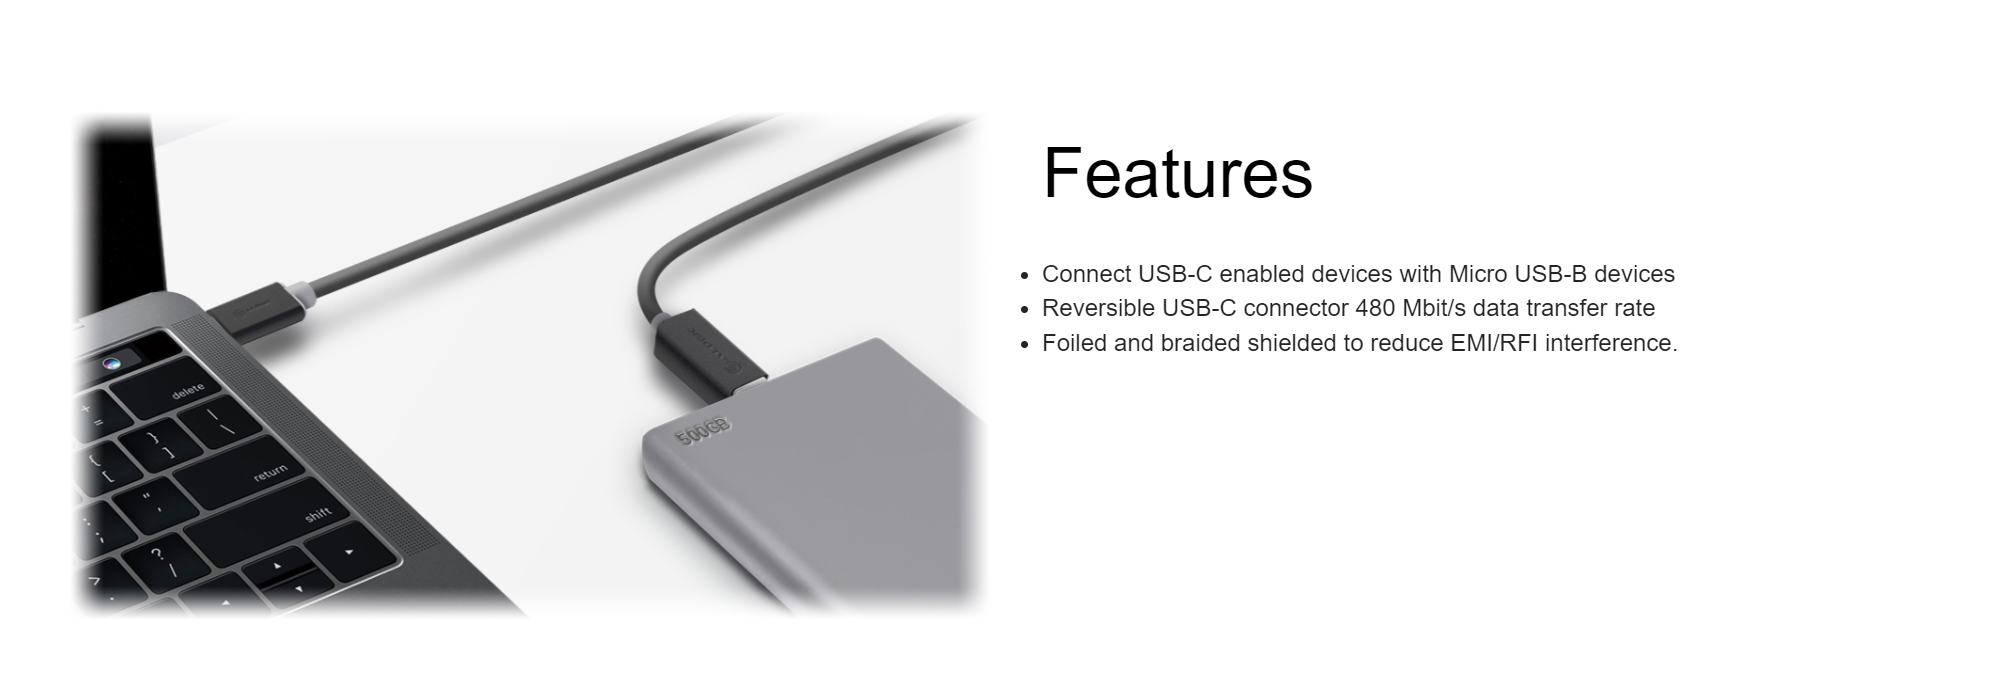 A large marketing image providing additional information about the product ALOGIC USB 2.0 Type-C to Micro USB Type-B 1m Cable - Additional alt info not provided